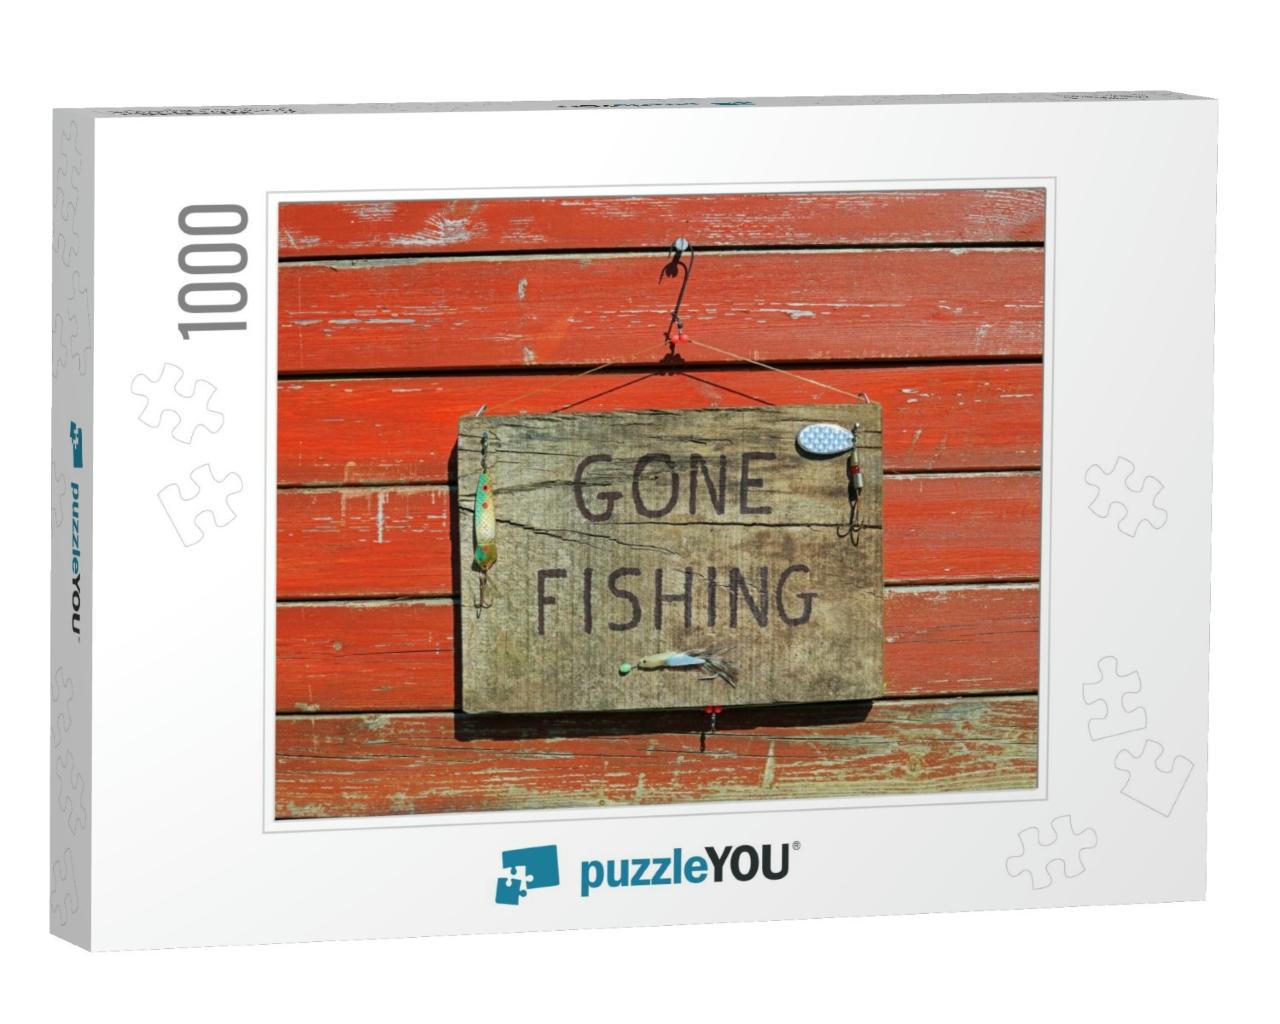 Gone Fishing Sign Written on a Wooden Plaque Hanging on a... Jigsaw Puzzle with 1000 pieces